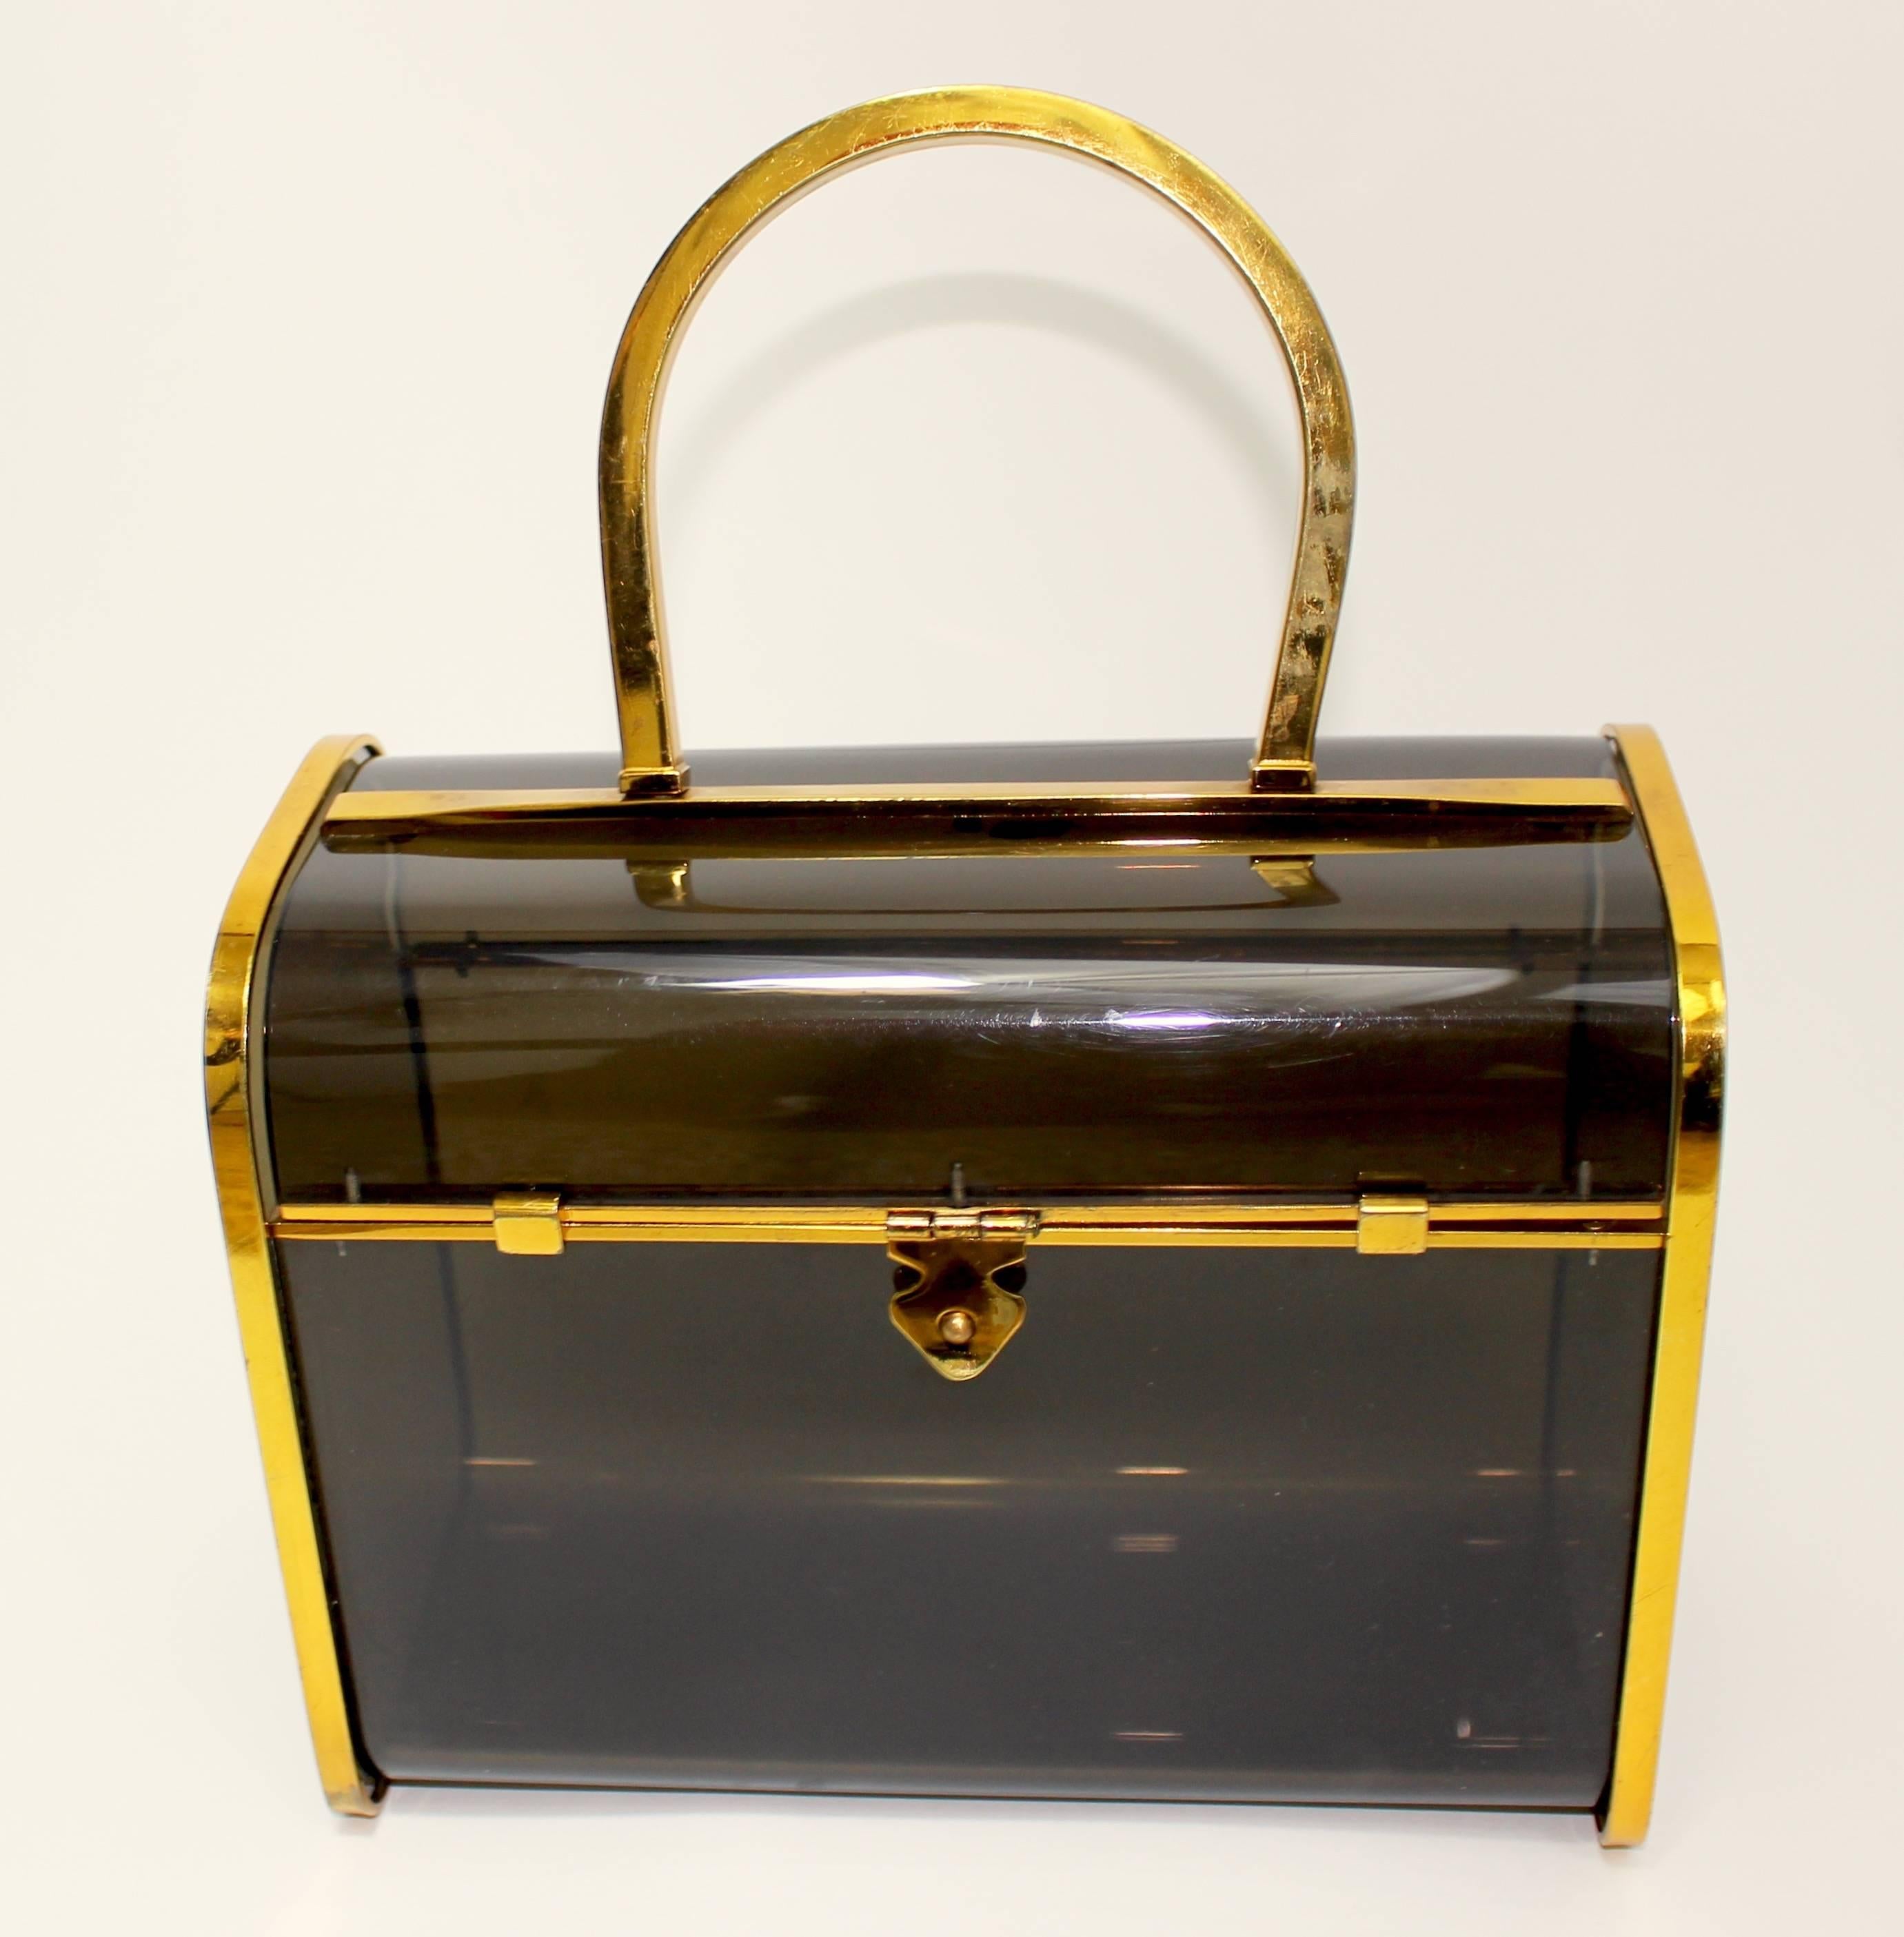 A vintage Judith Leiber translucent smoke color lucite box bag with gold plated frame and top handle.

Very good condition, some plating loss to the gold finish on the handle.

Measurements:
Width. 8 inches
Depth: 4 inches
Height: 6 and 1/4